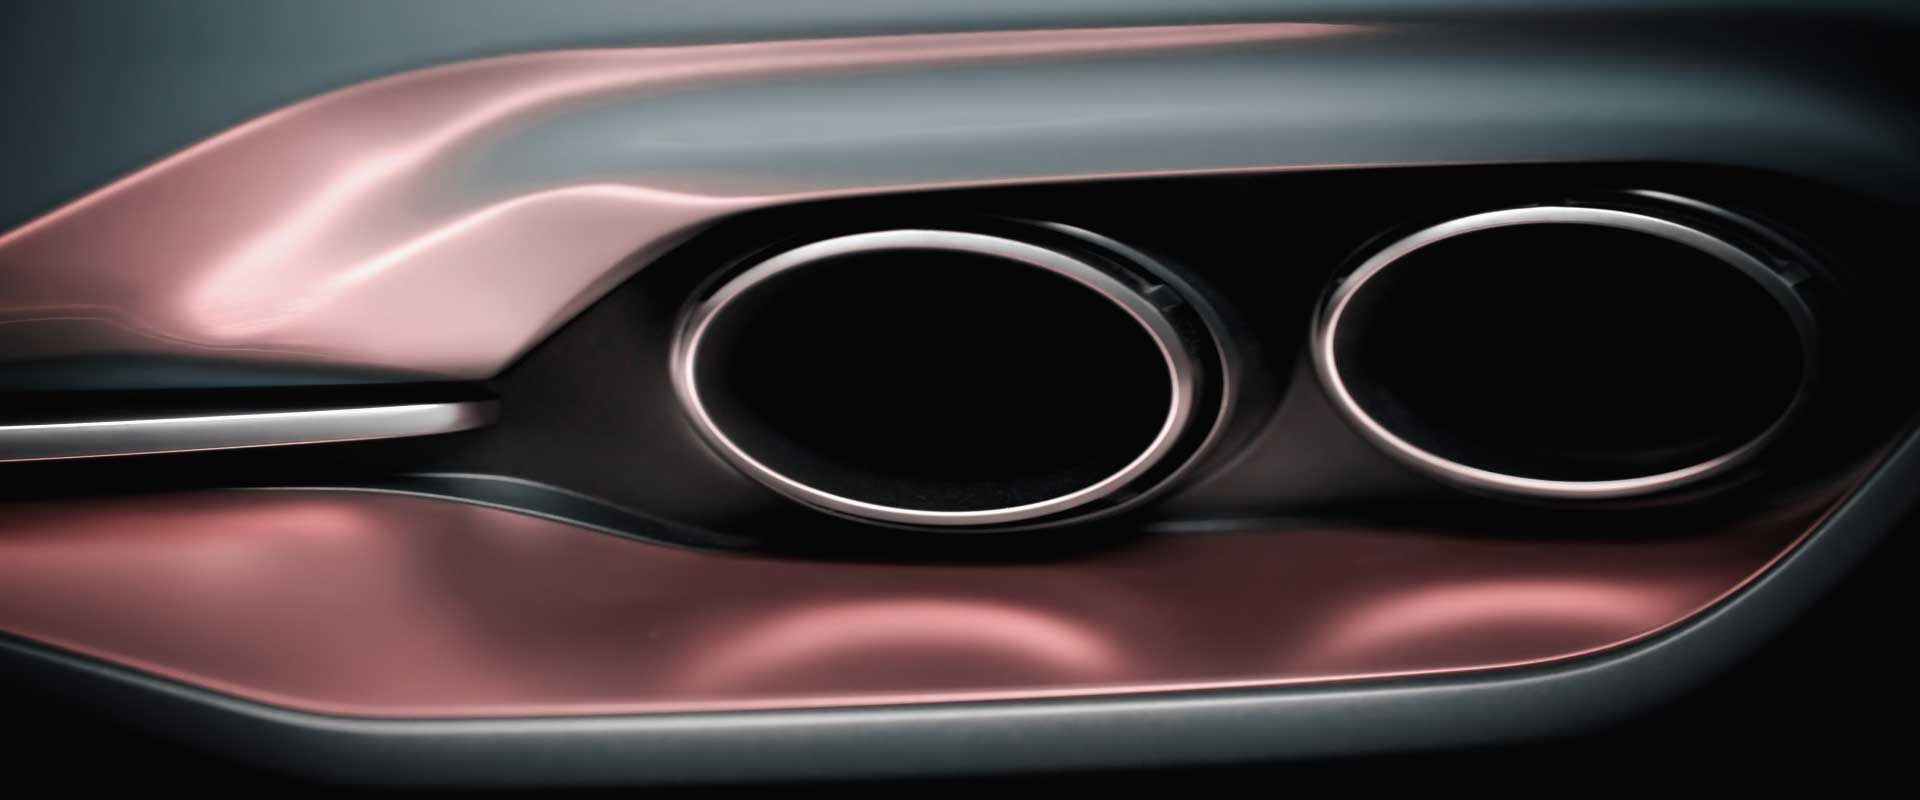 Detail exhaust pipes. Still from Hyundai Genesis commercial.